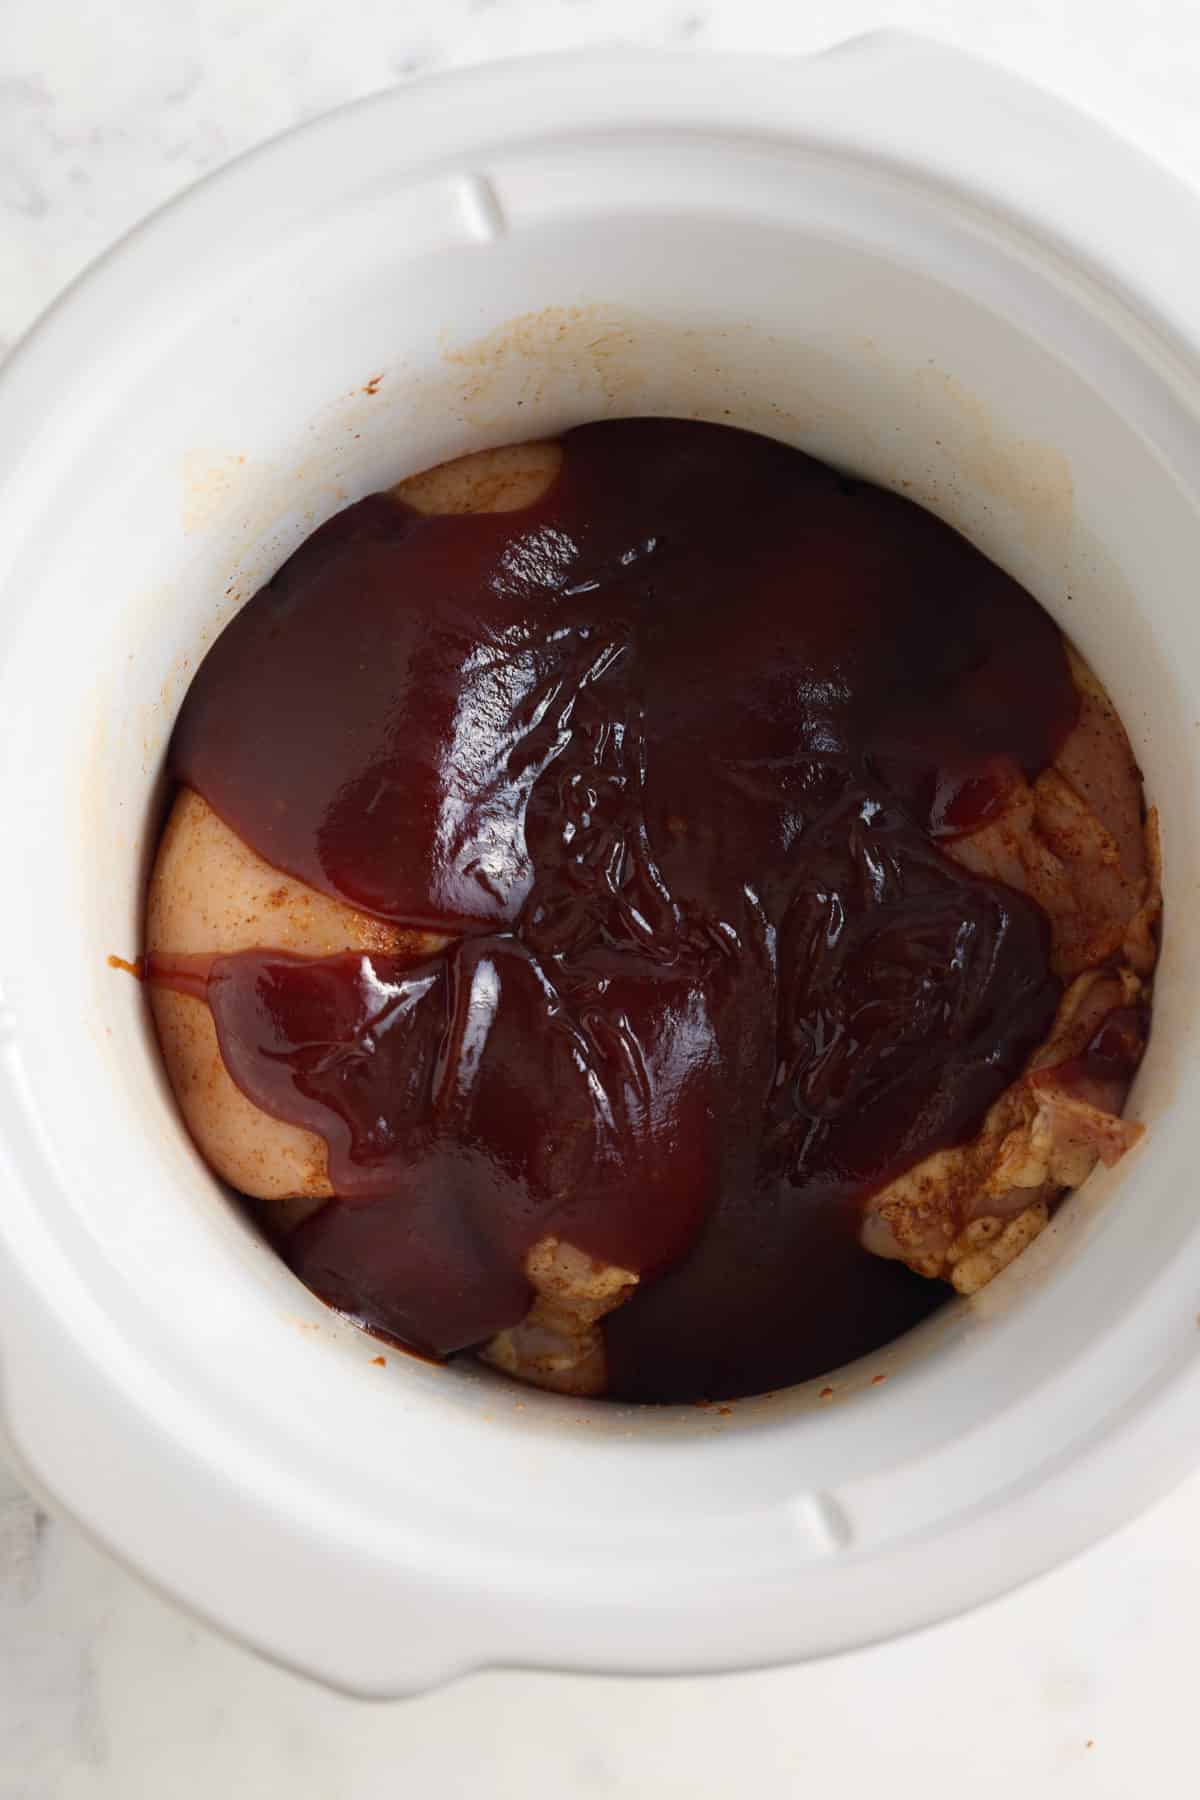 bbq sauce added to the chicken.